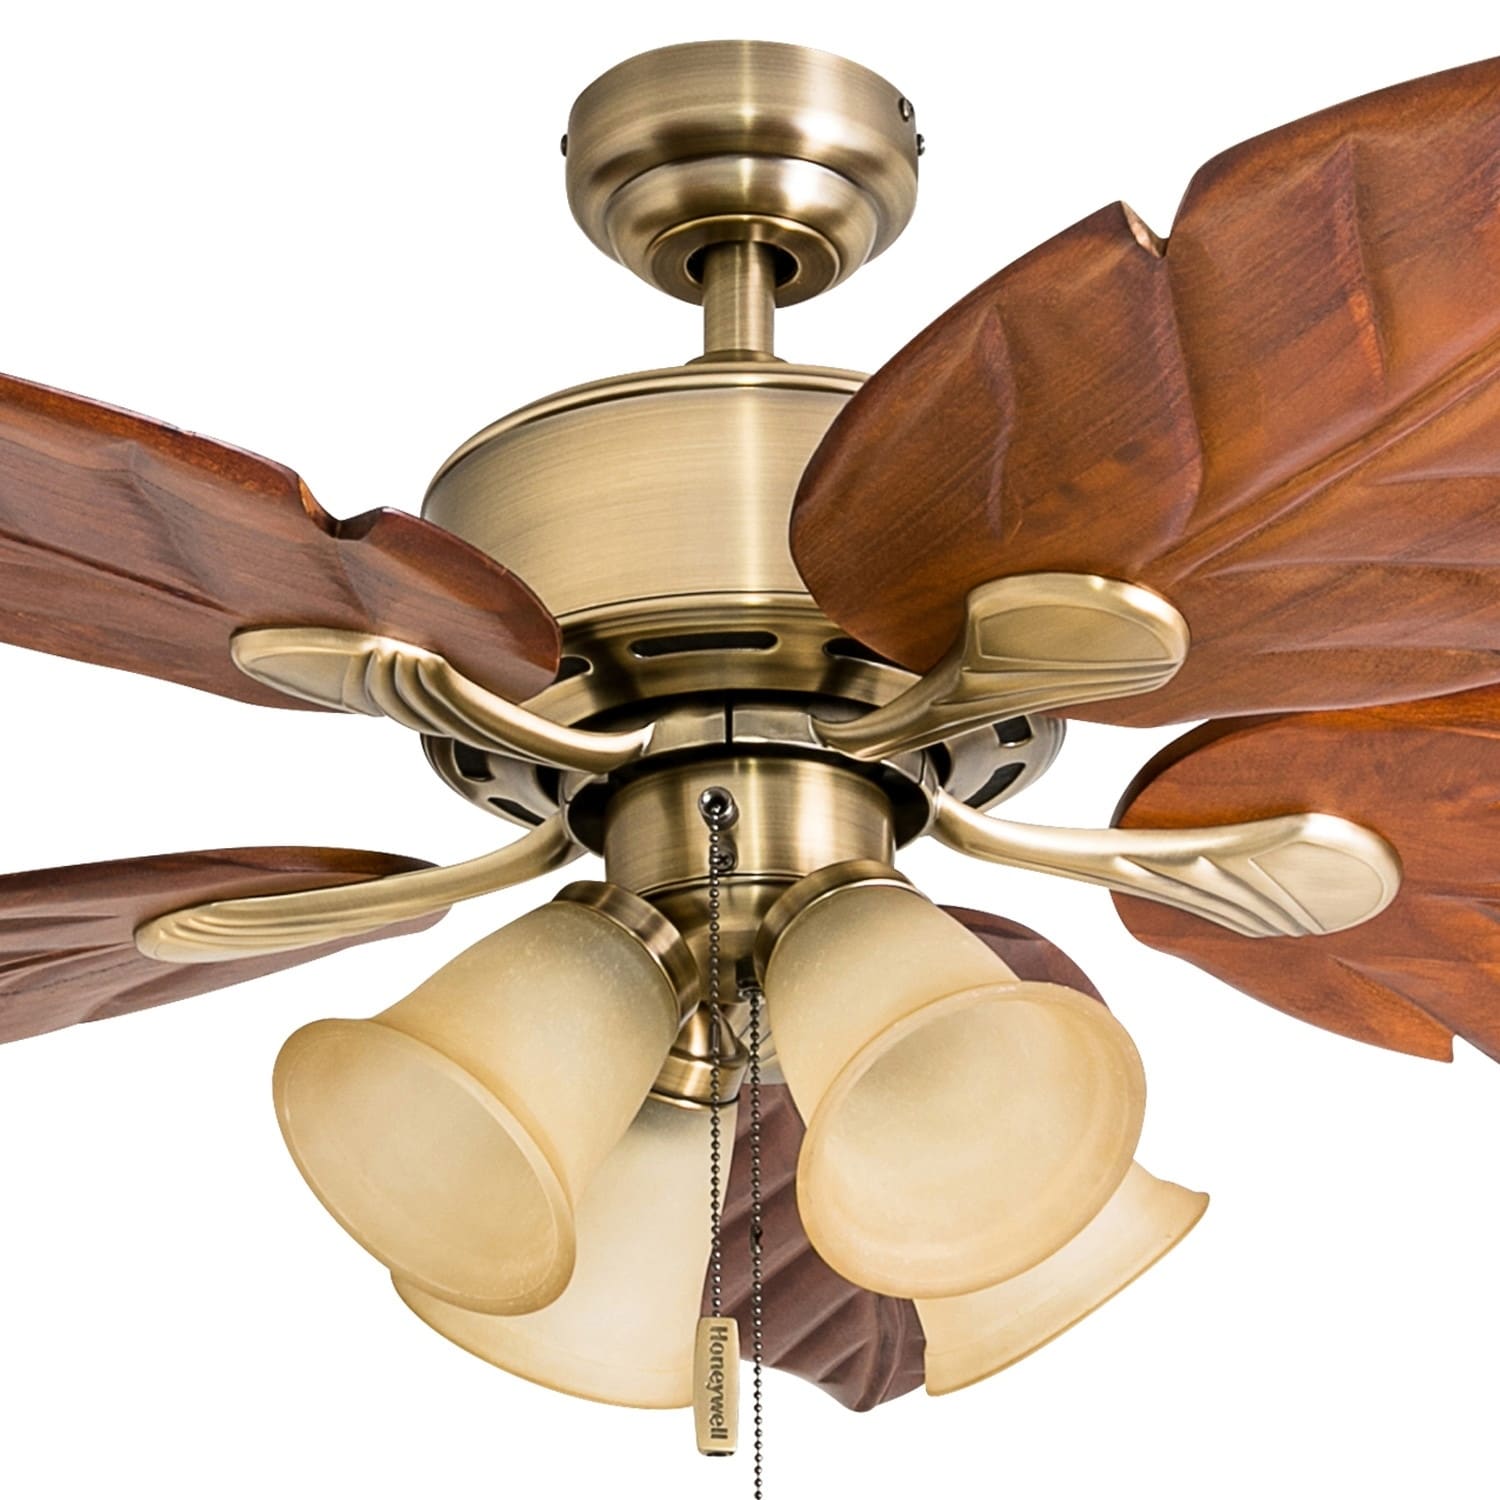 Honeywell Royal Palm Aged Brass Tropical Led Ceiling Fan With Light 52 Inch